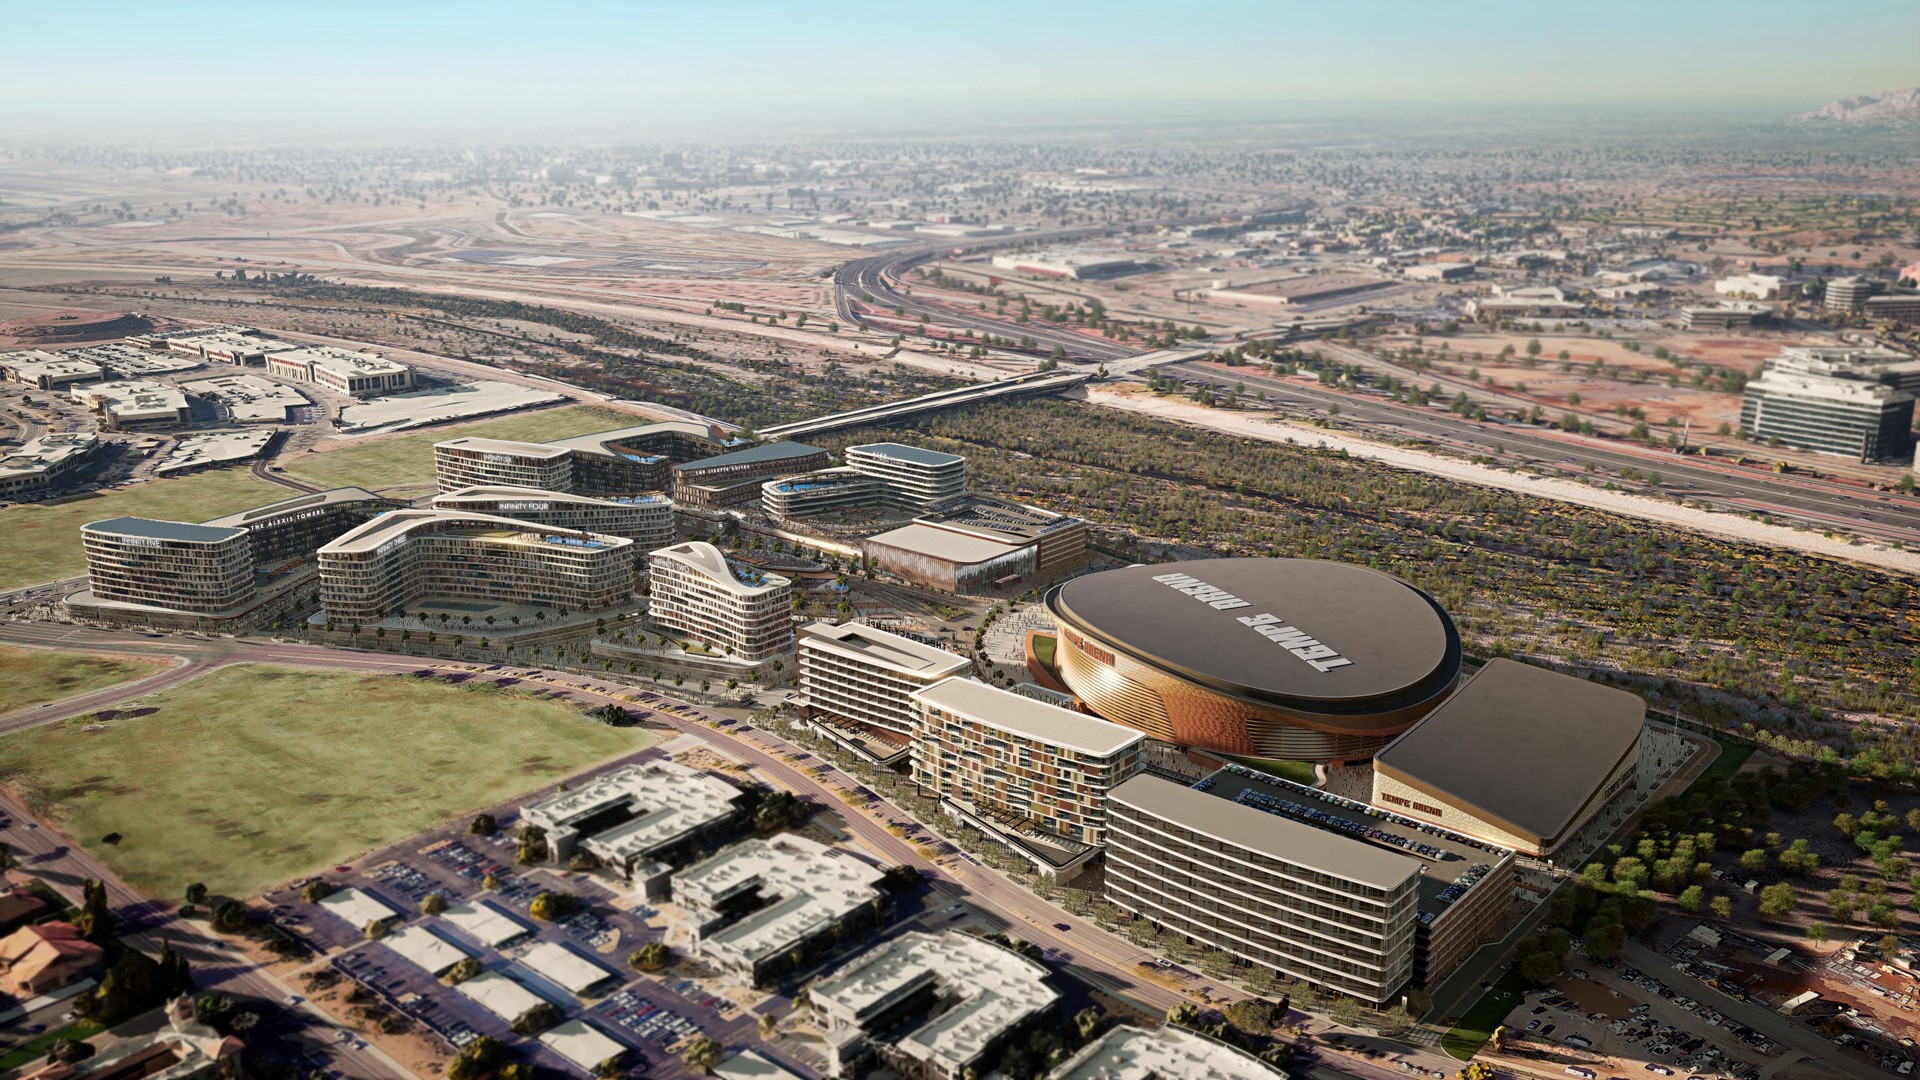 Tempe will let voters decide on new Coyotes arena in election